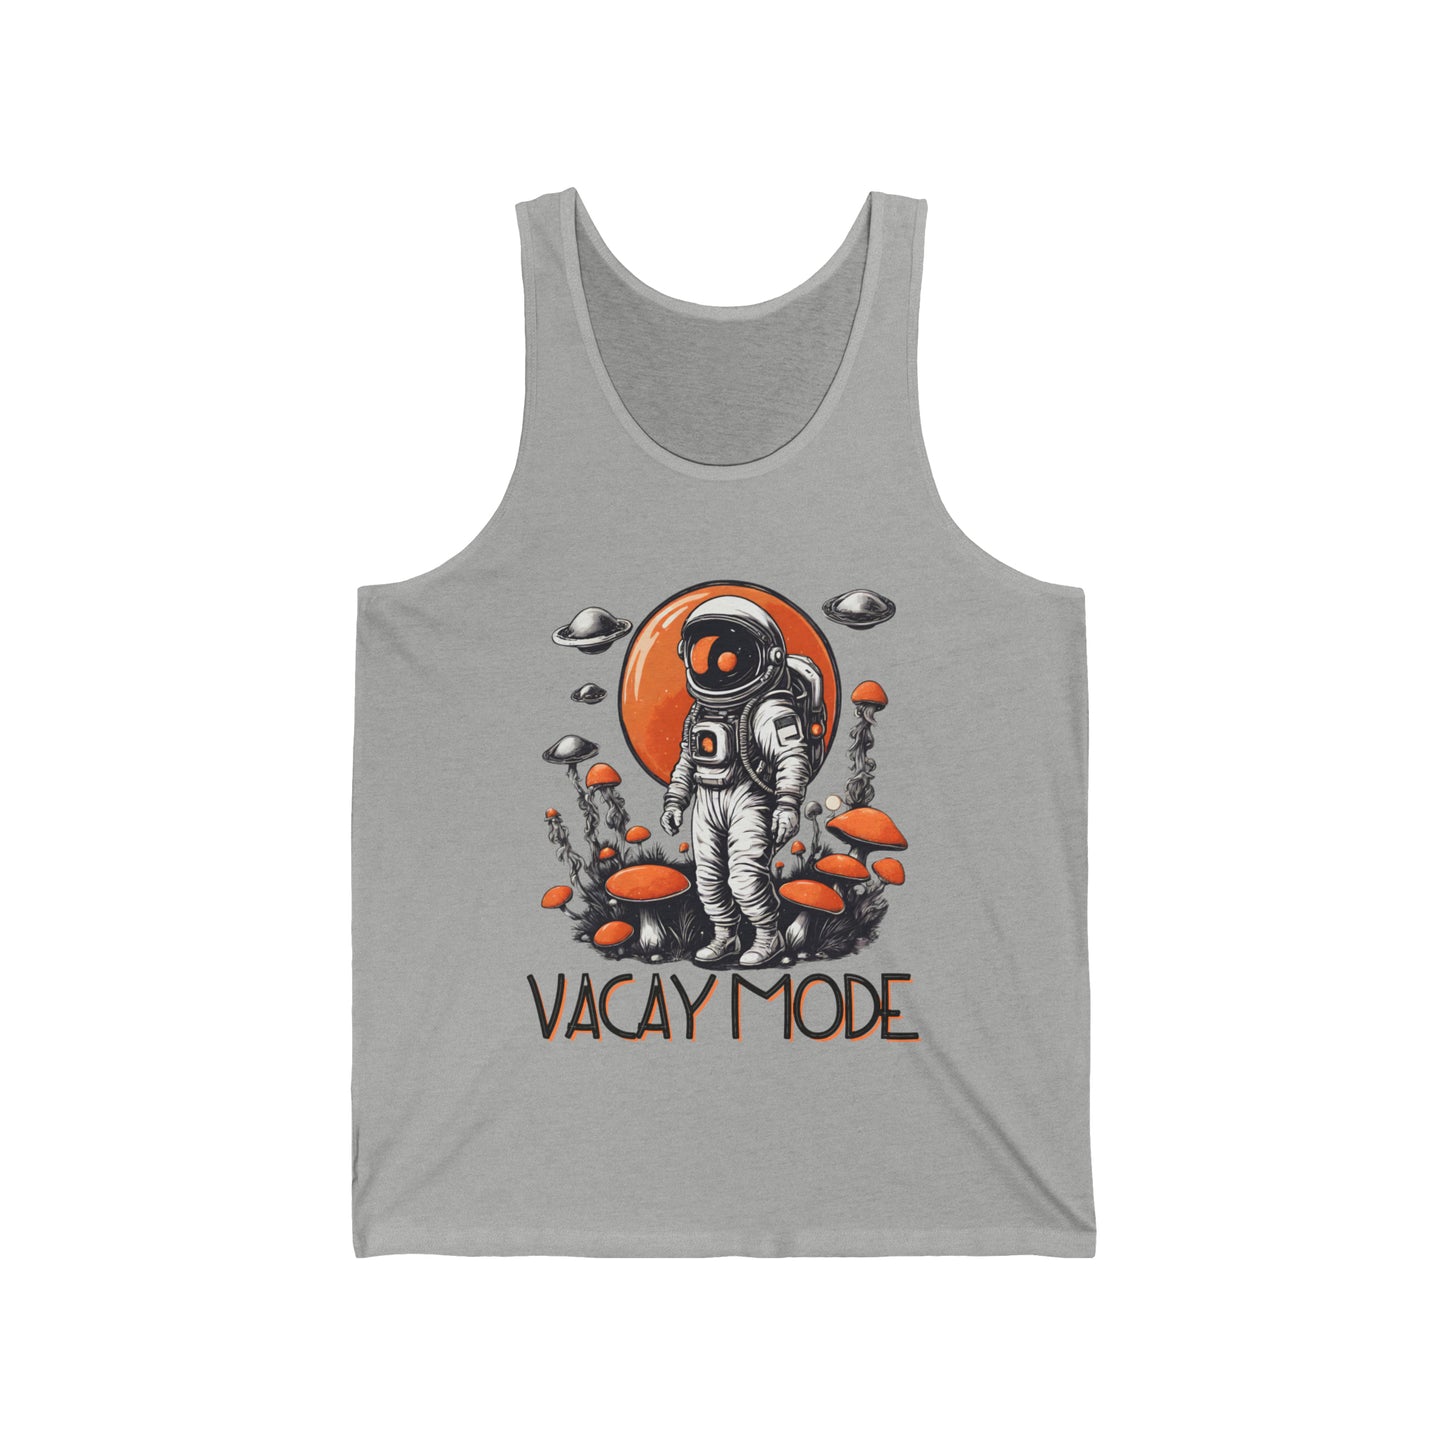 Super Dope Threads - Vacay Mode Tank